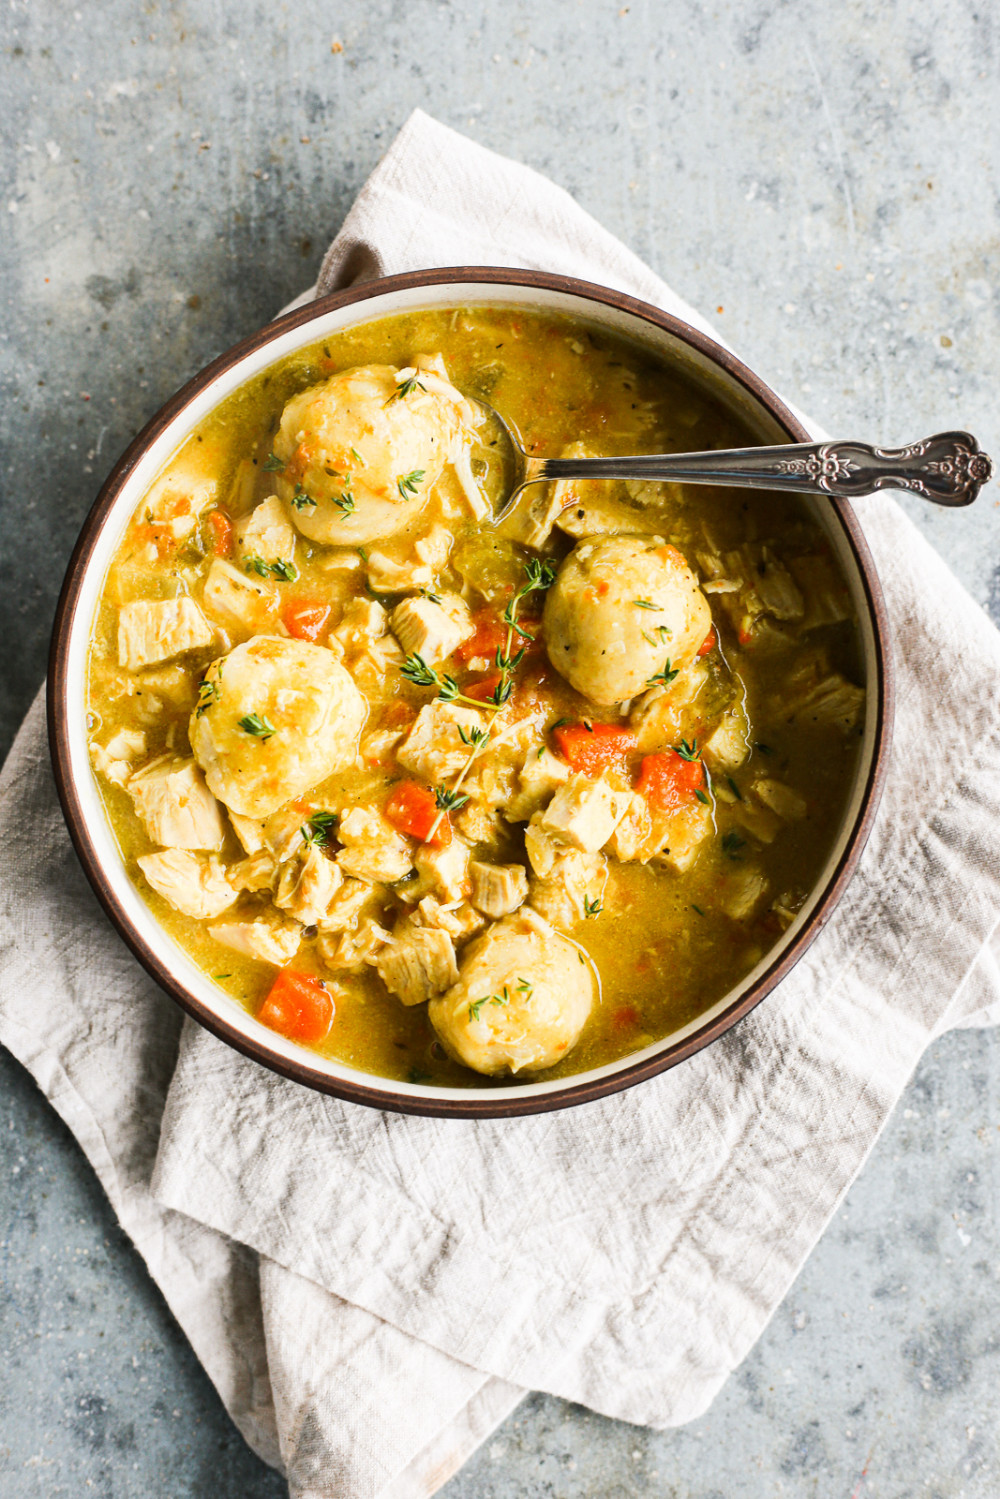 Gluten Free Dumplings For Soup
 Gluten Free and Dairy Free Chicken and Dumplings The